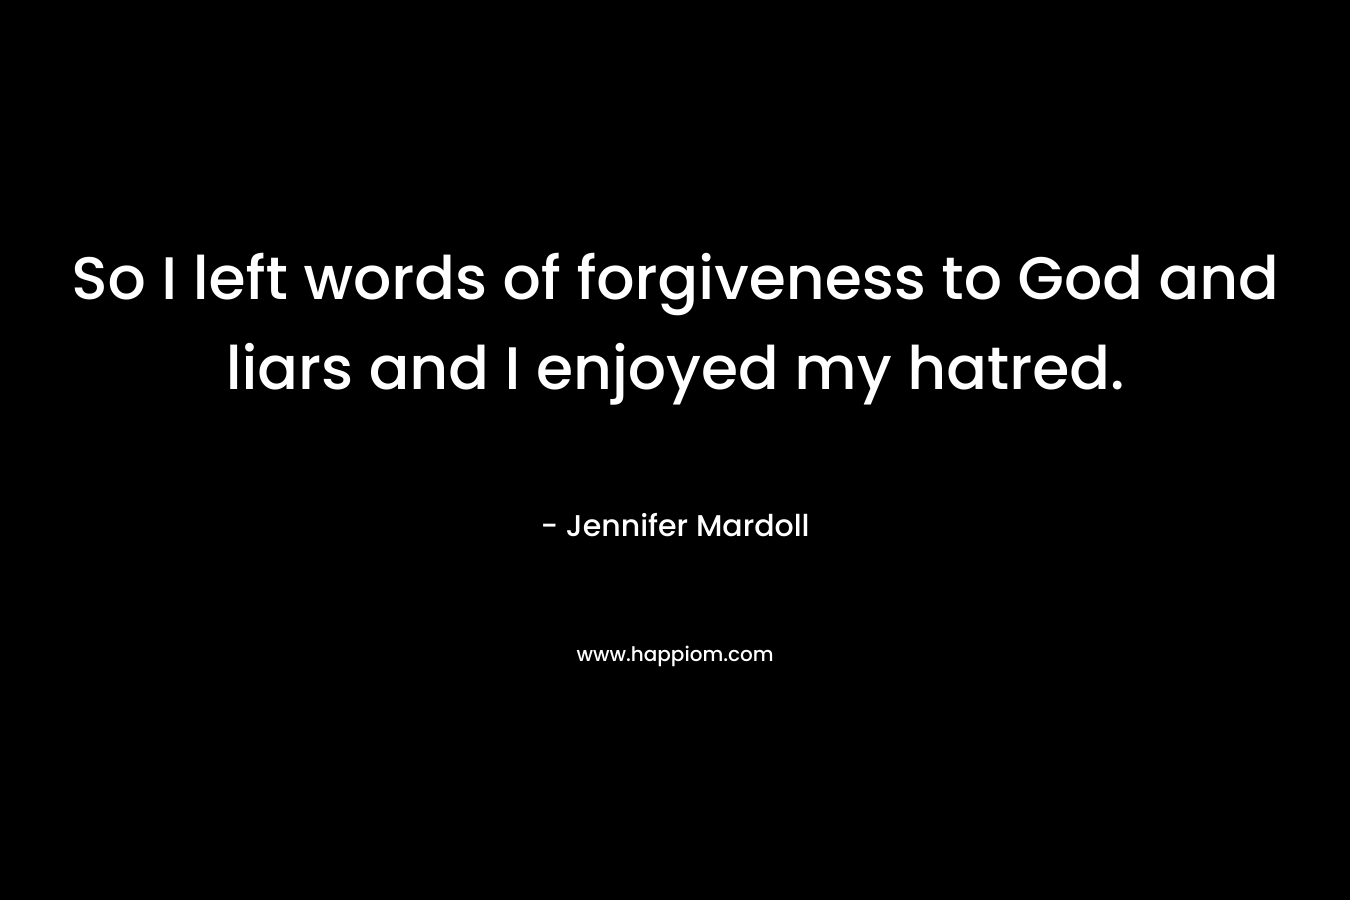 So I left words of forgiveness to God and liars and I enjoyed my hatred.